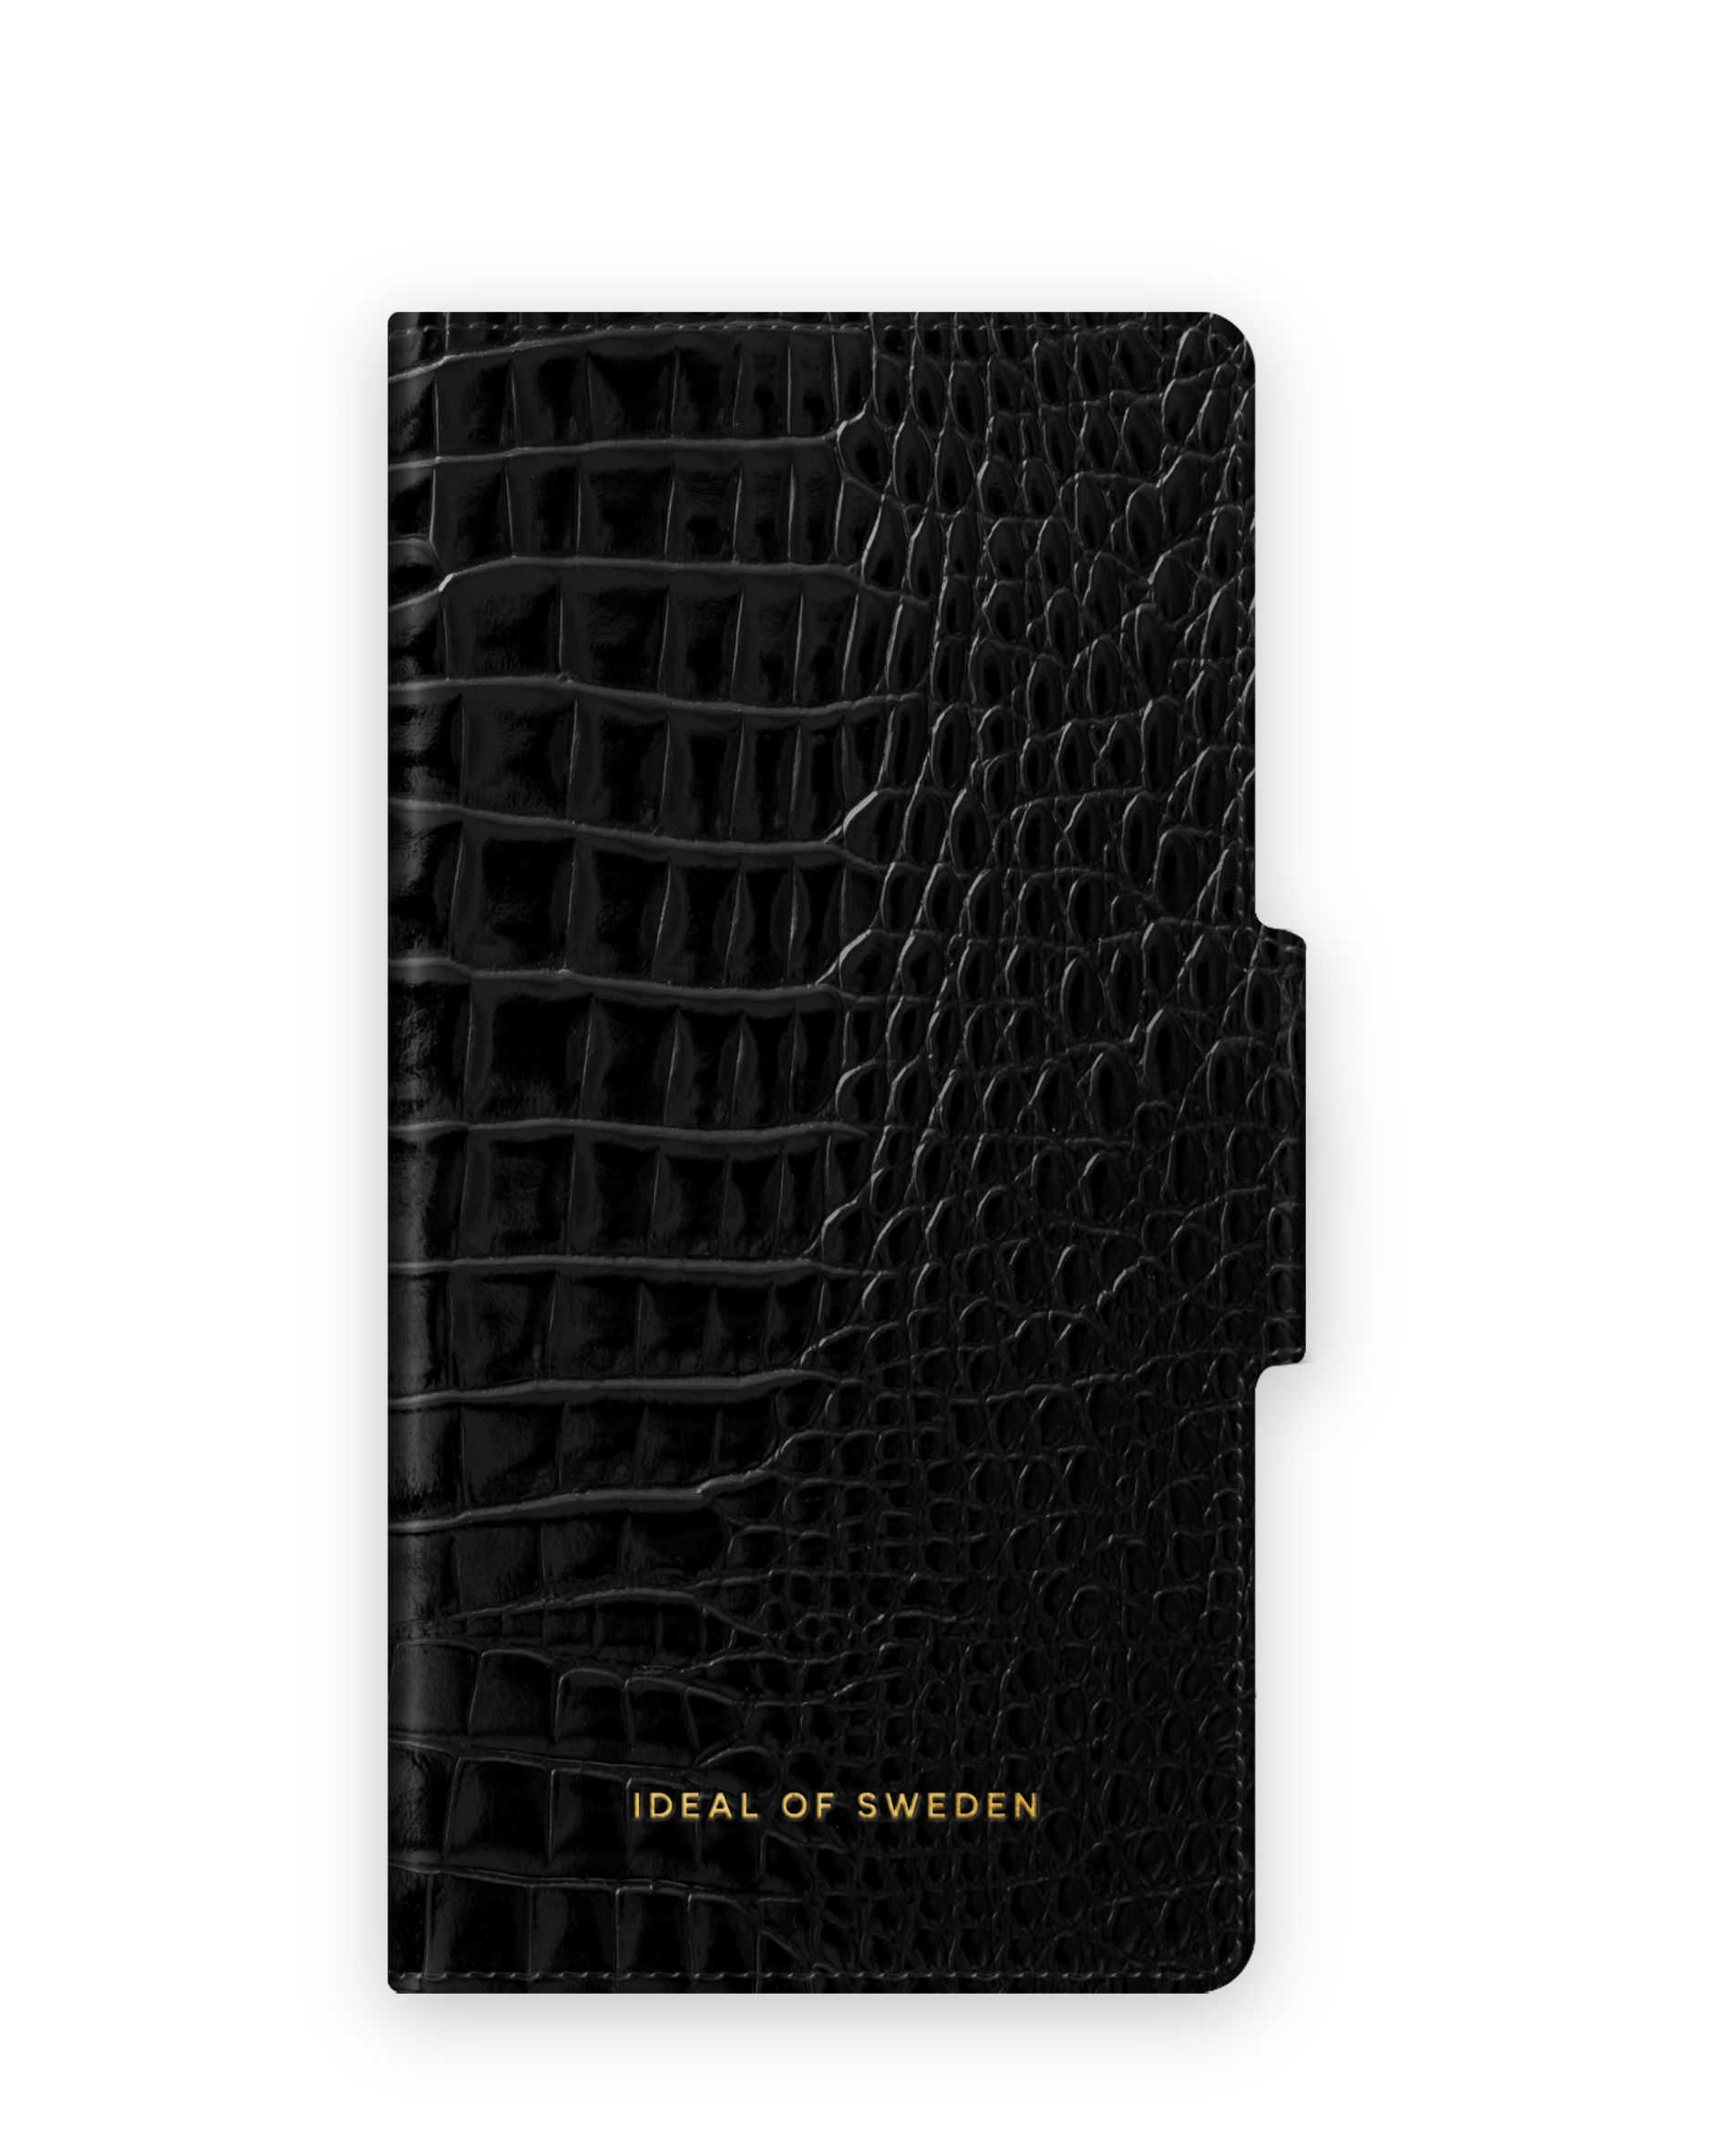 IDEAL OF SWEDEN IDAW-I2067, Backcover, Apple, Max, Croco IPhone Neo Noir 12 Pro